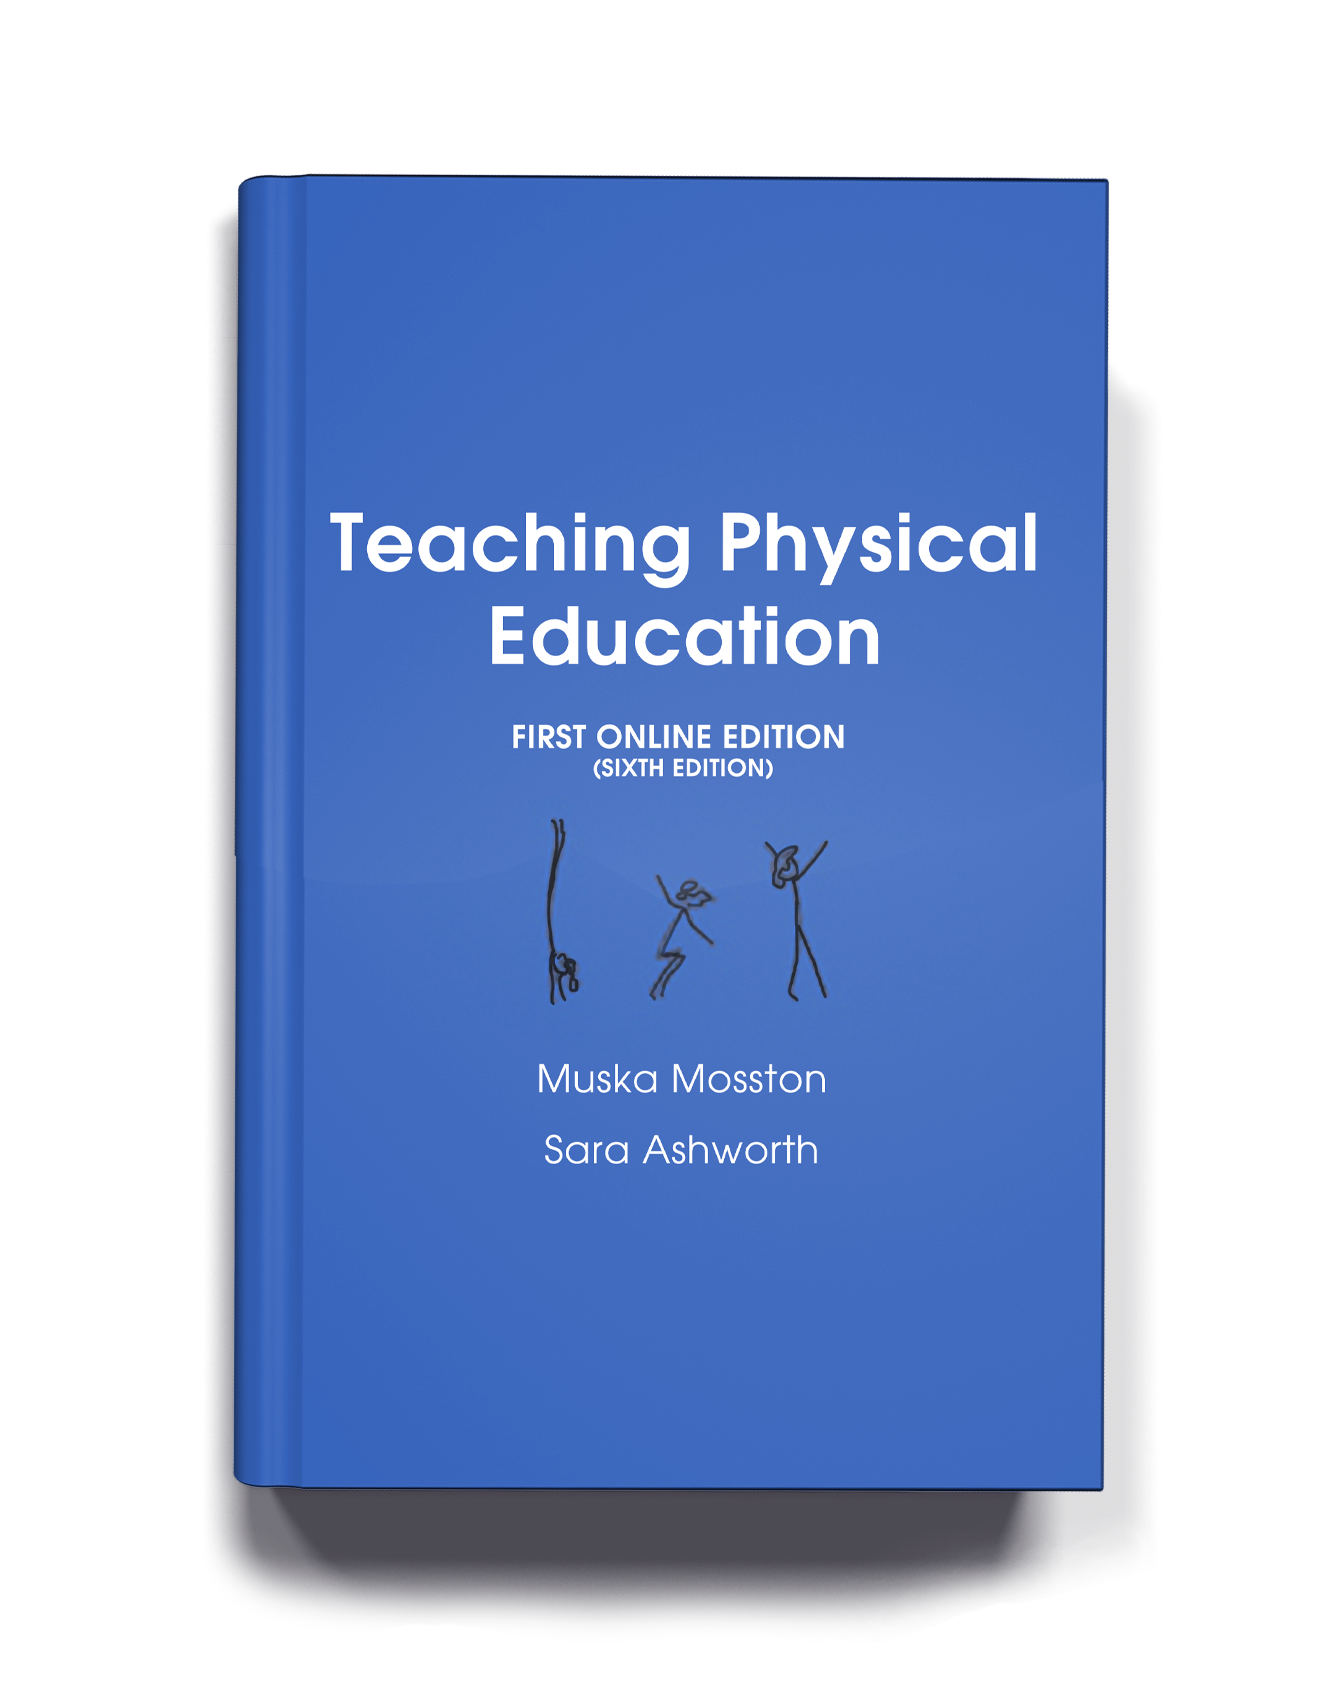 The Cover for Teaching Physical Education - 1st Online Edition by Muska Mosston and Sara Ashworth